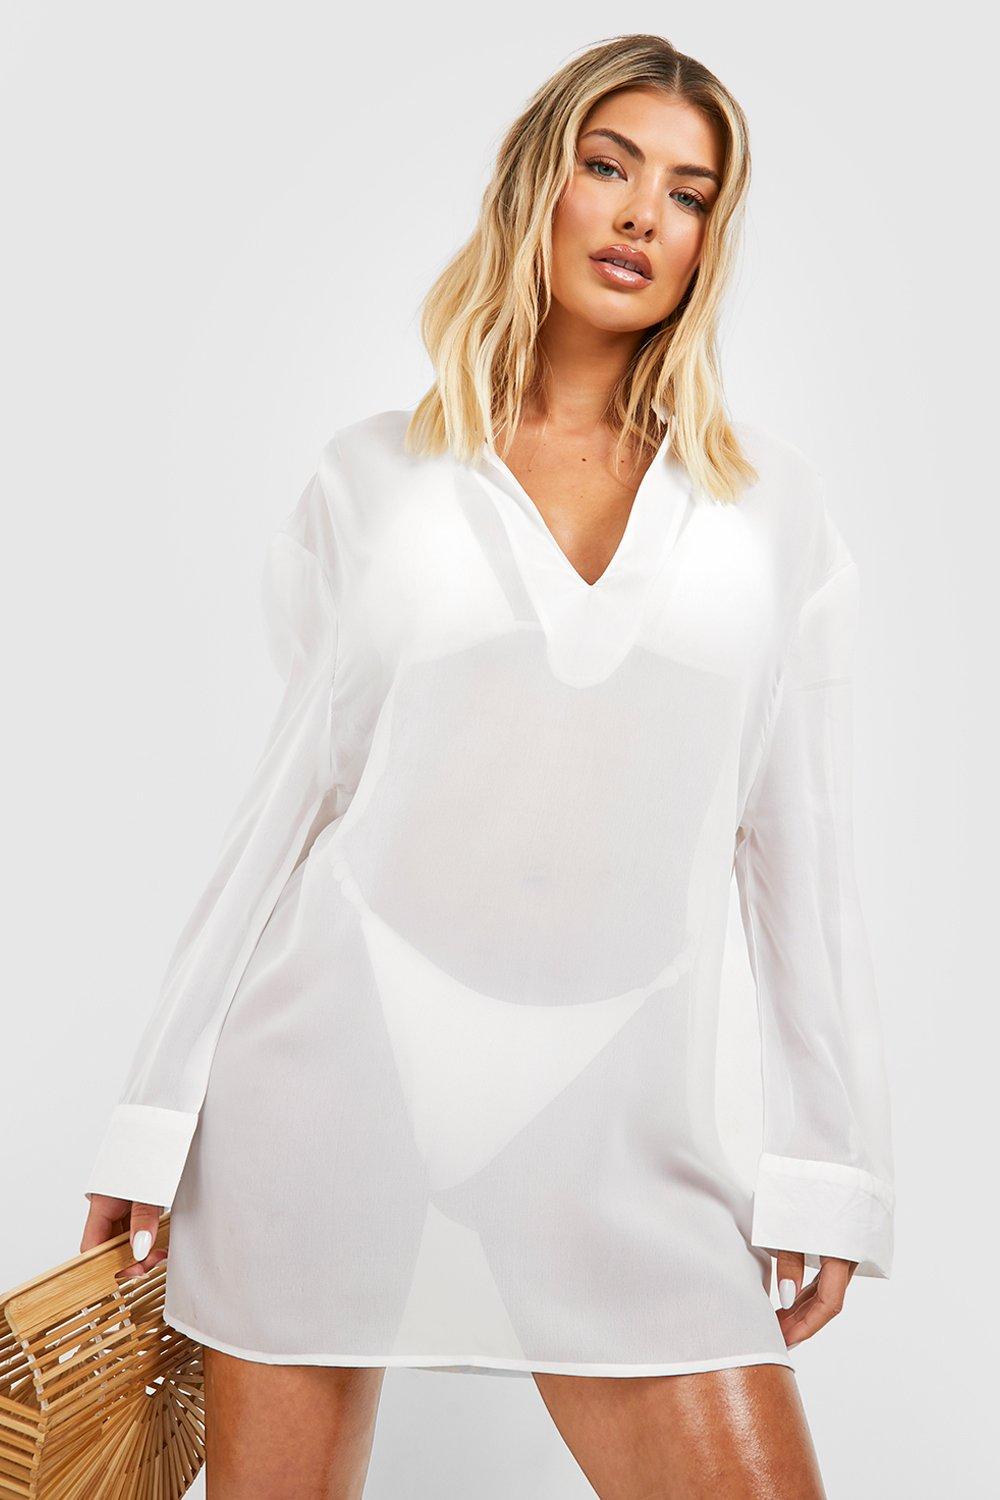 Essential Beach Cover-up Tunic